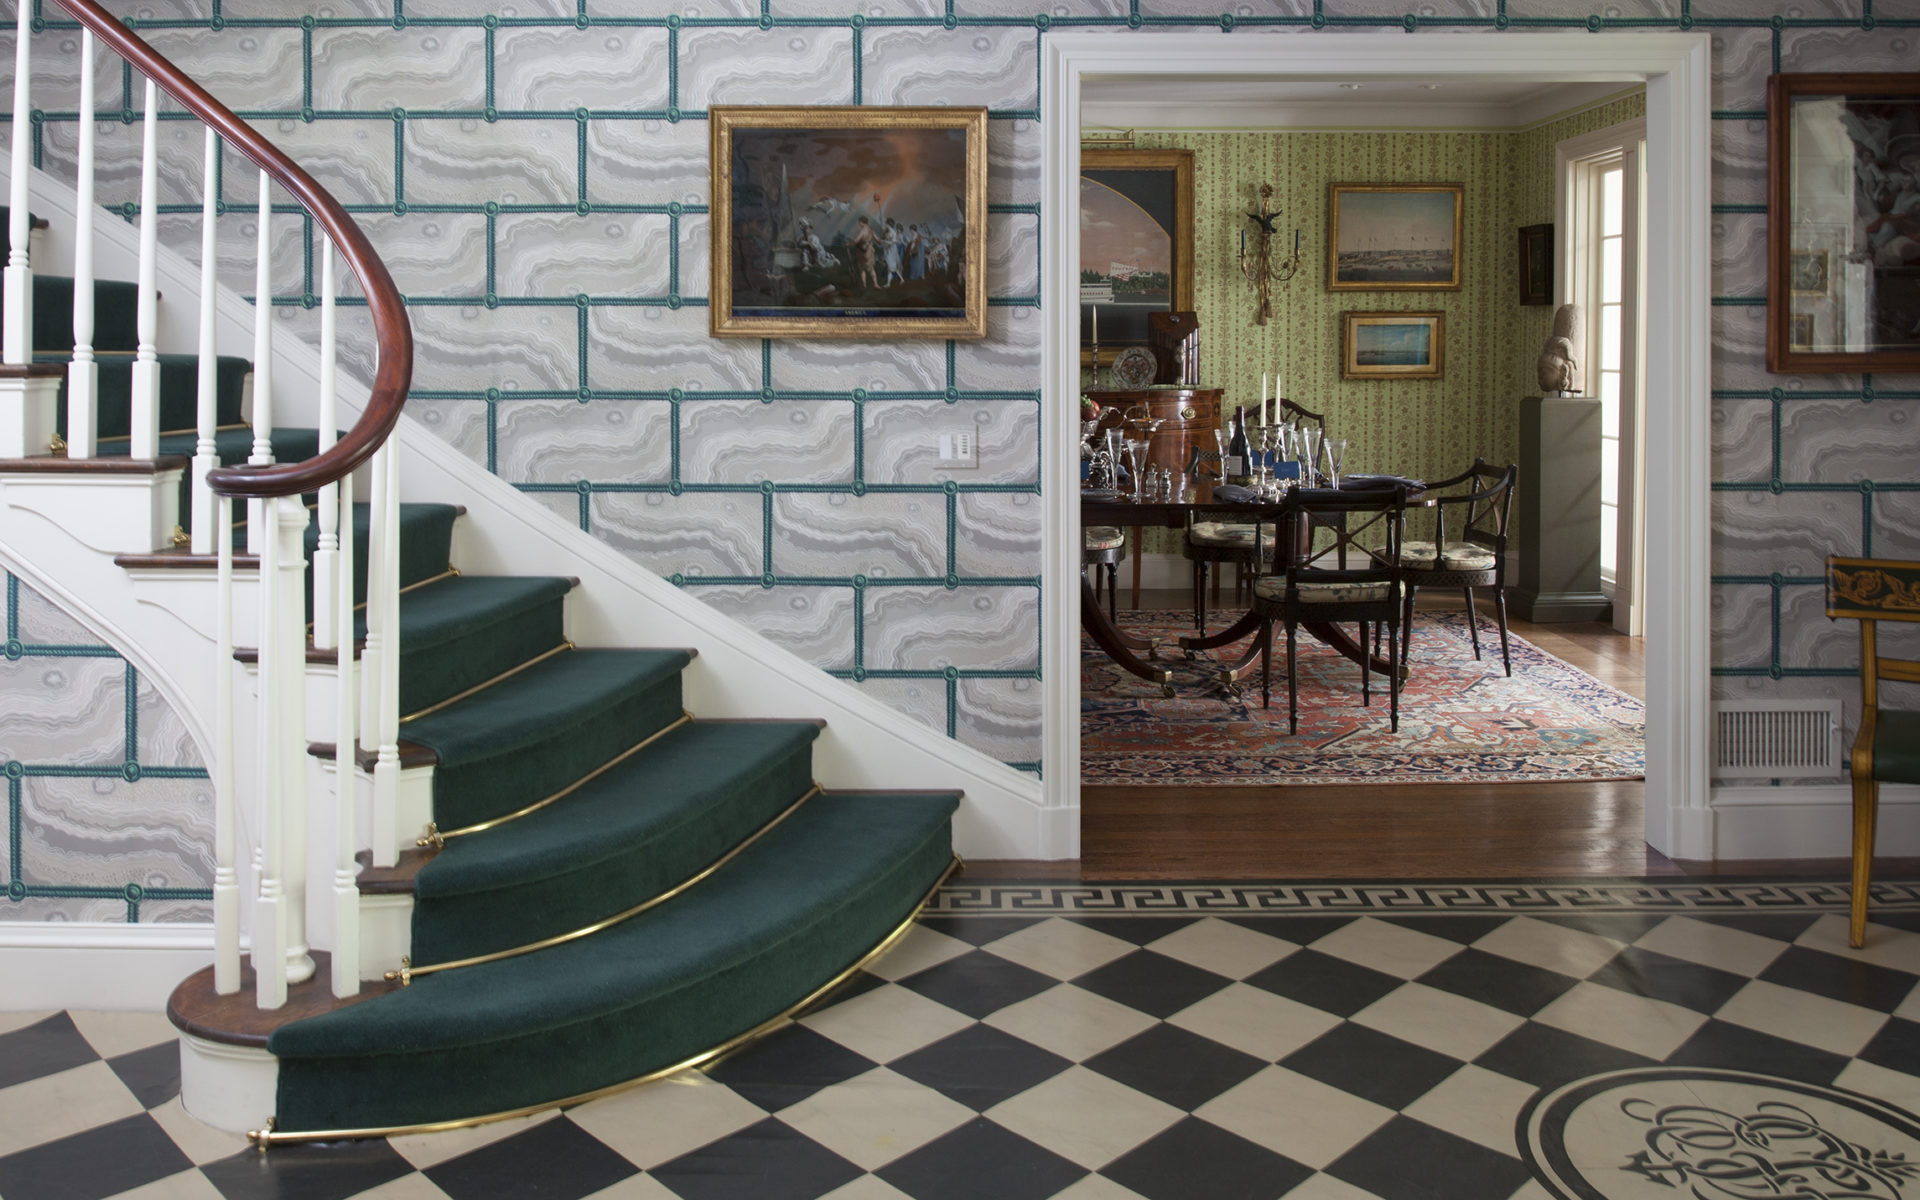 New Design Lessons From A Classic 19th Century Decorating